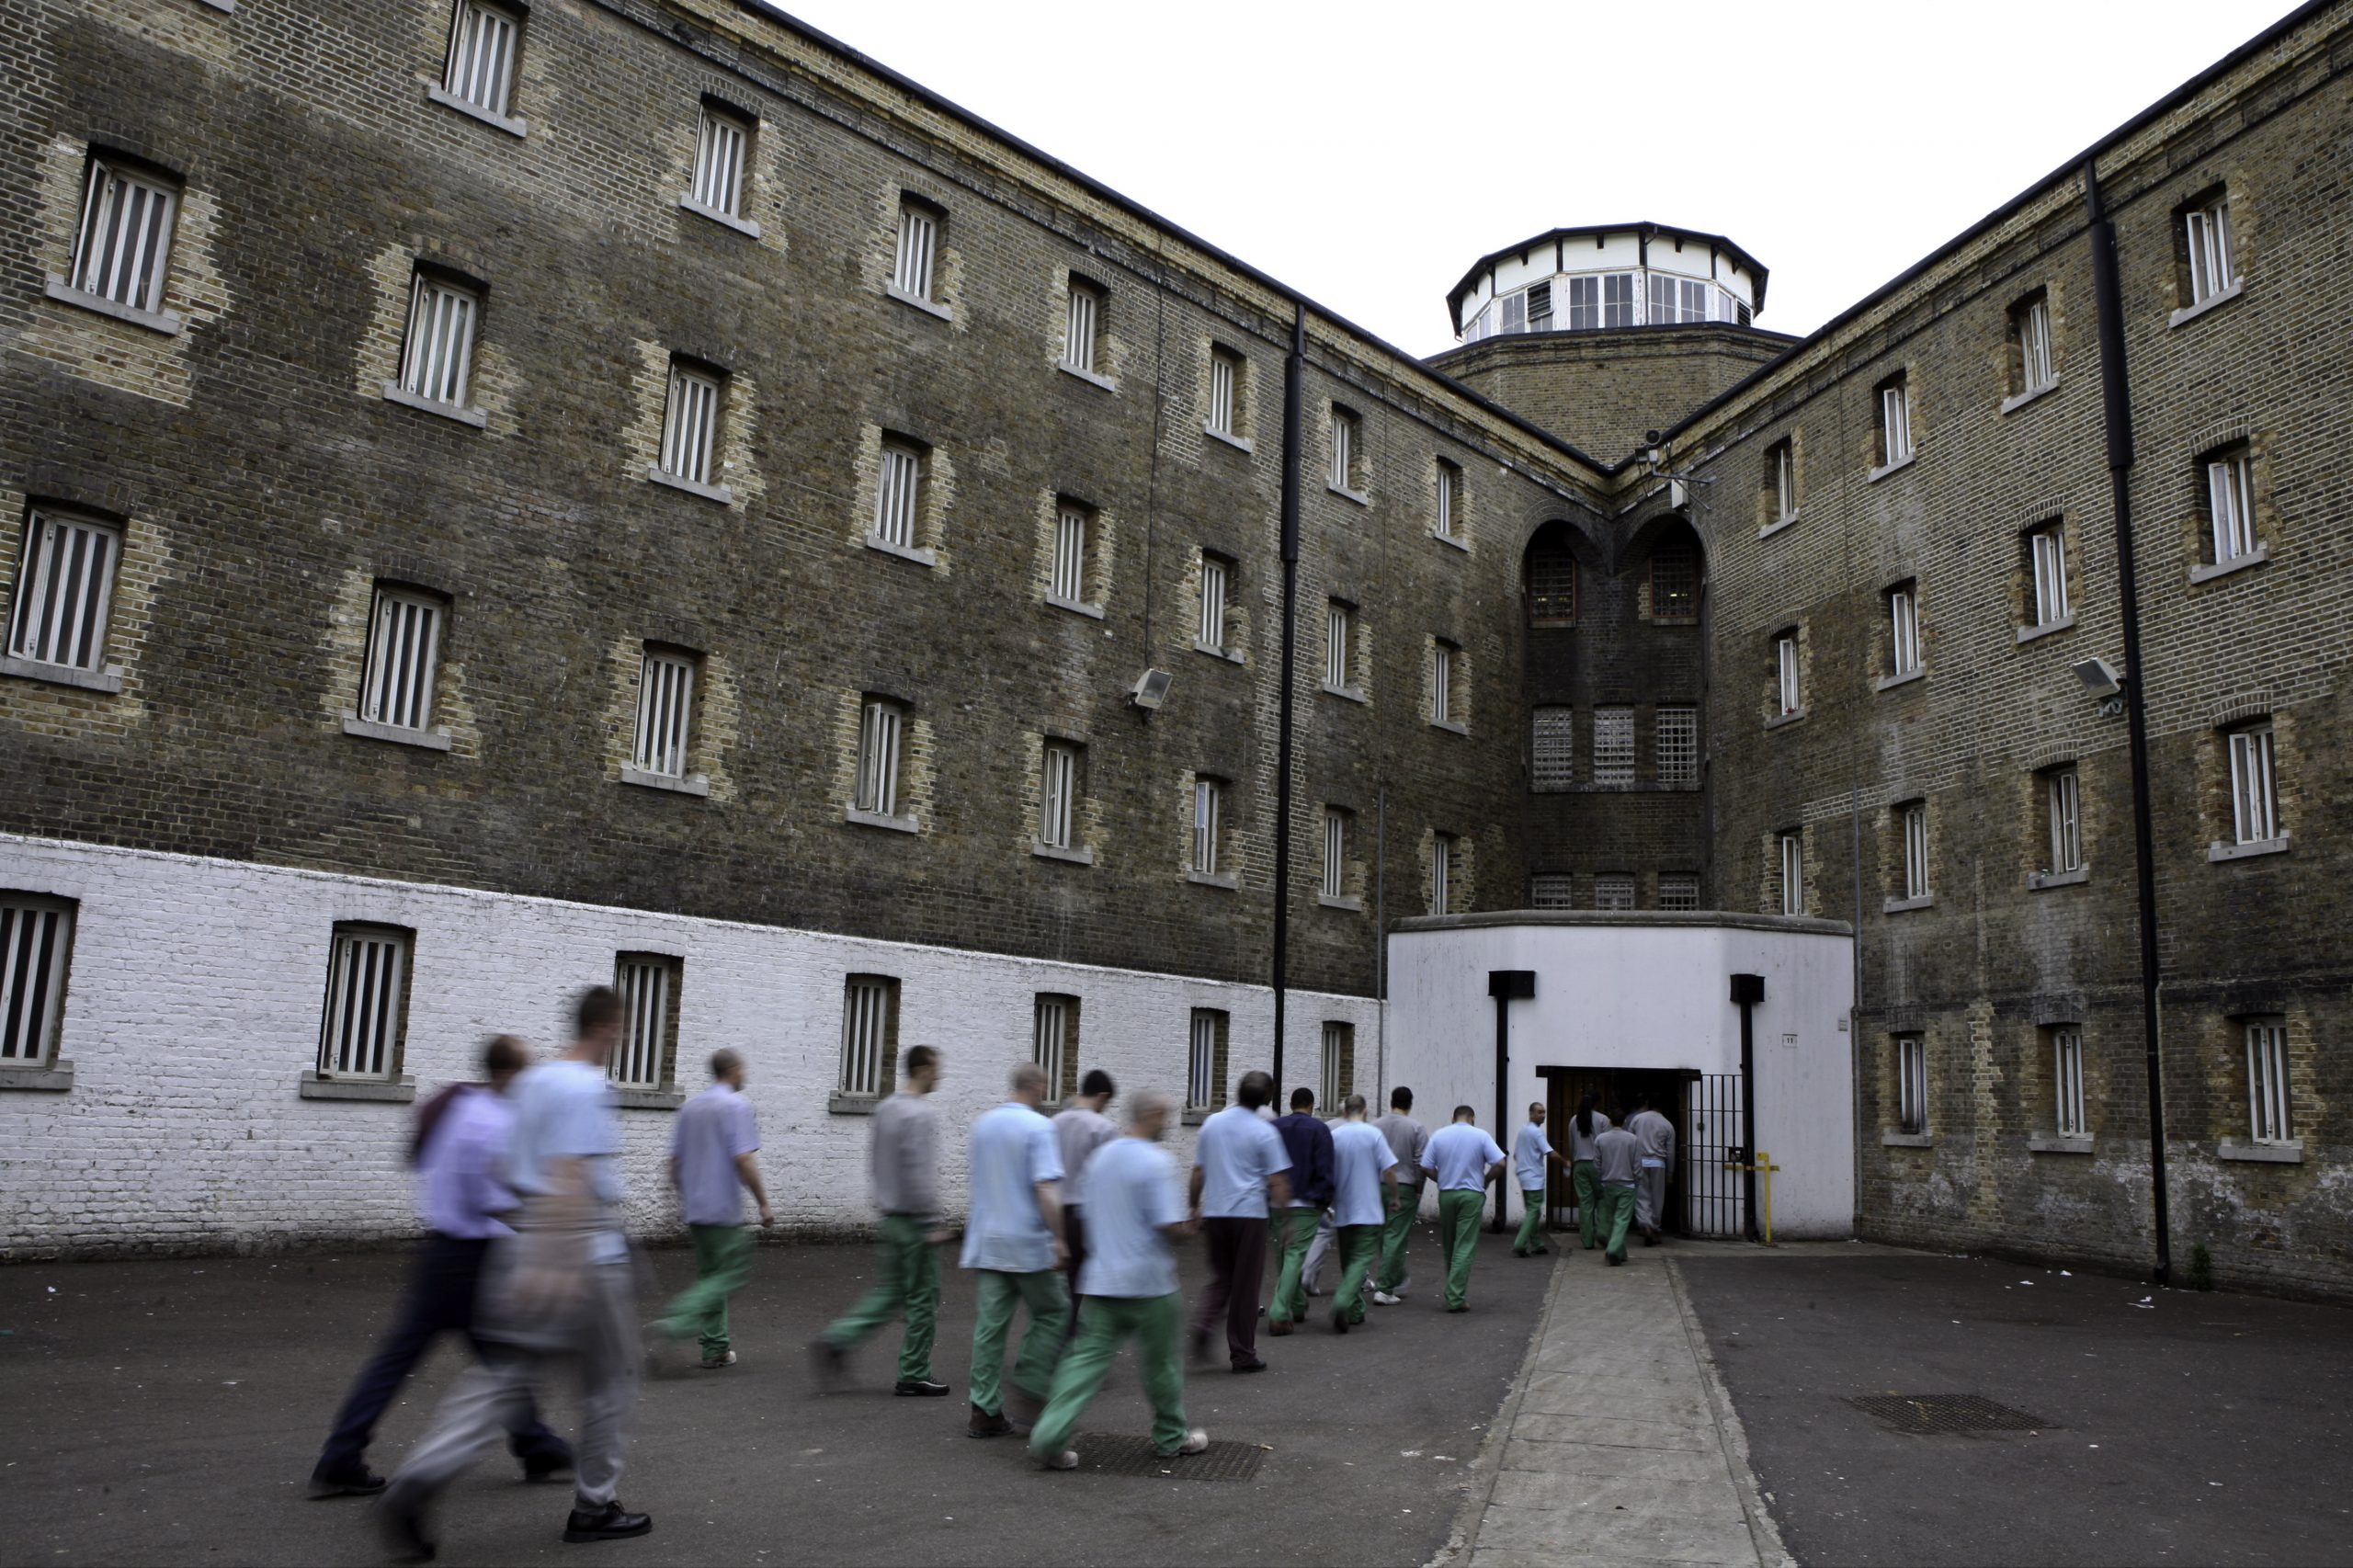 Prisoners return from their jobs to their wings for lunch at Wandsworth prison..HMP Wandsworth in South West London was built in 1851 and is one of the largest prisons in Western Europe. It has a capacity of 1456 prisoners.